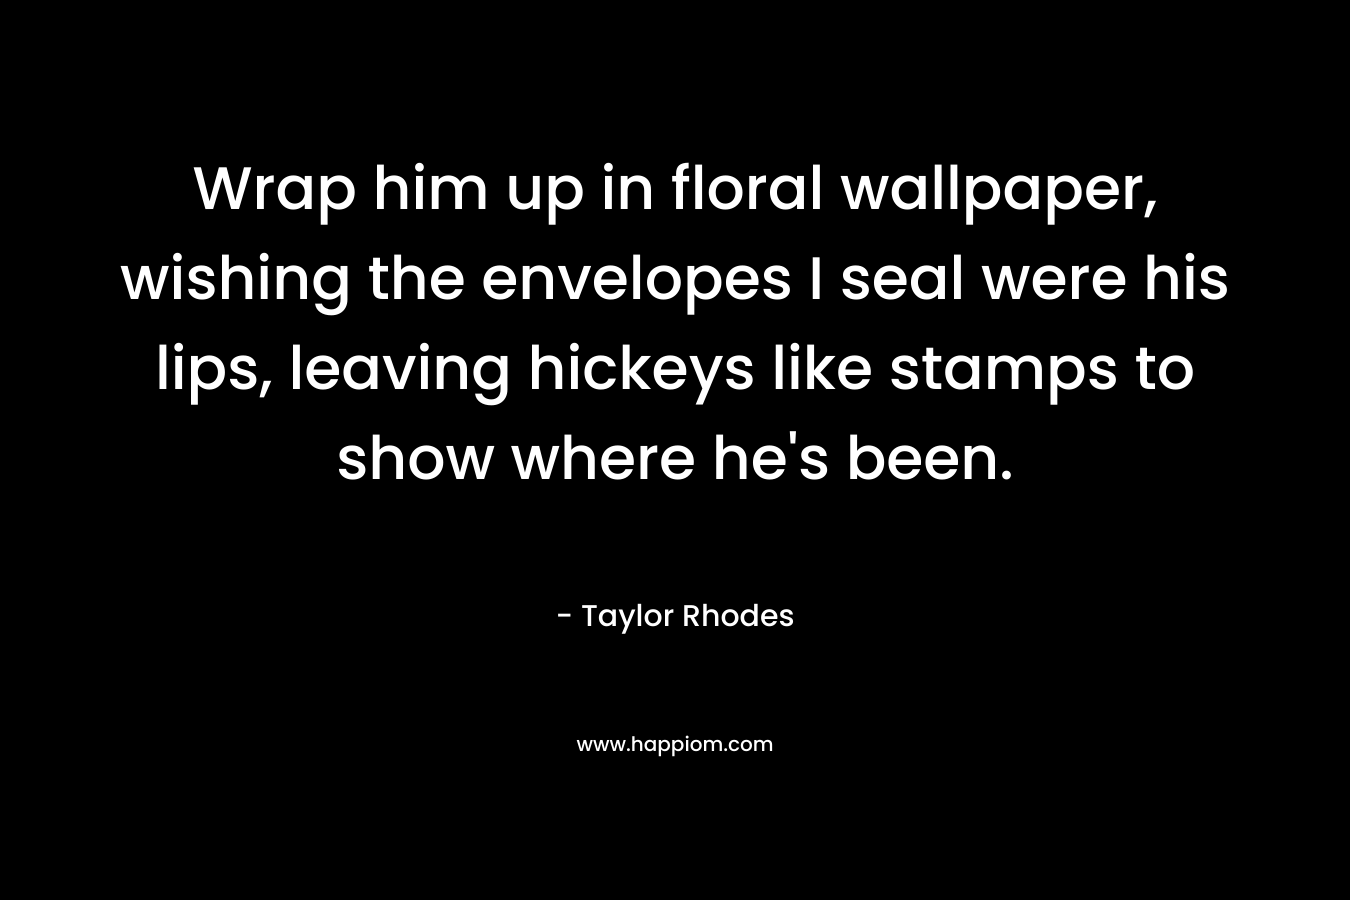 Wrap him up in floral wallpaper, wishing the envelopes I seal were his lips, leaving hickeys like stamps to show where he’s been. – Taylor Rhodes